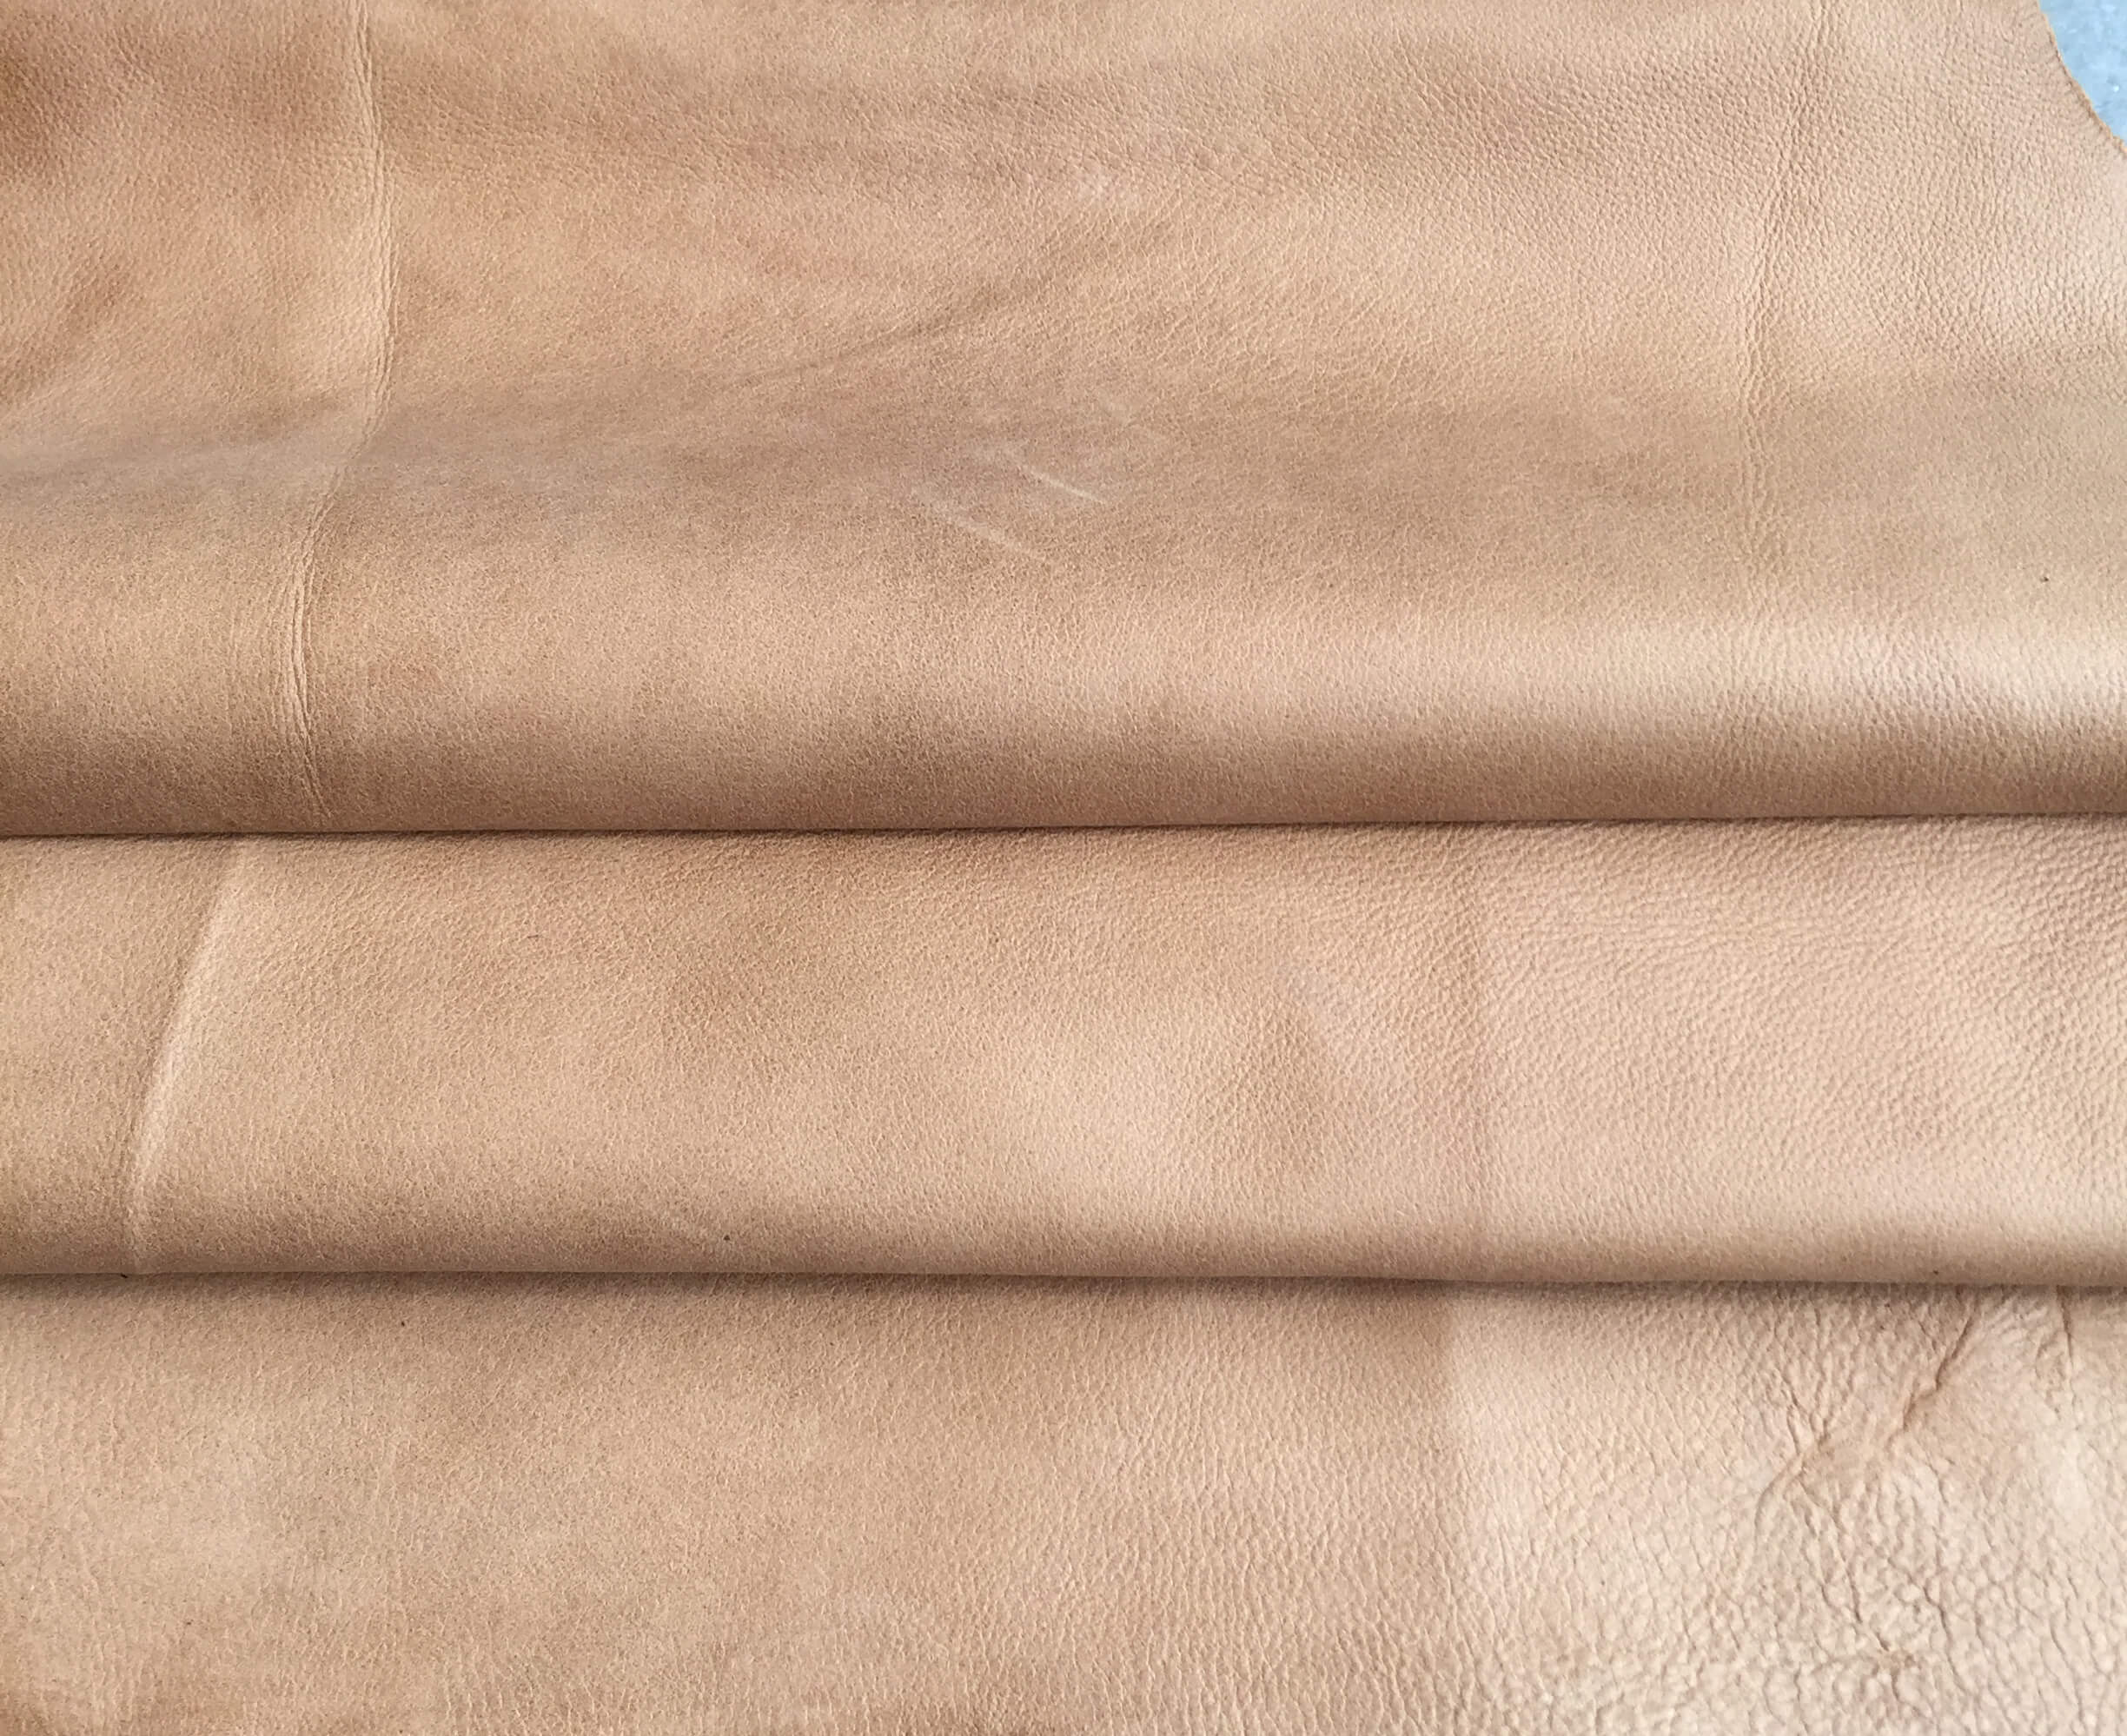 Premium Light Camel Lambskin Leather Hide - Luxurious Quality for Crafting & Projects